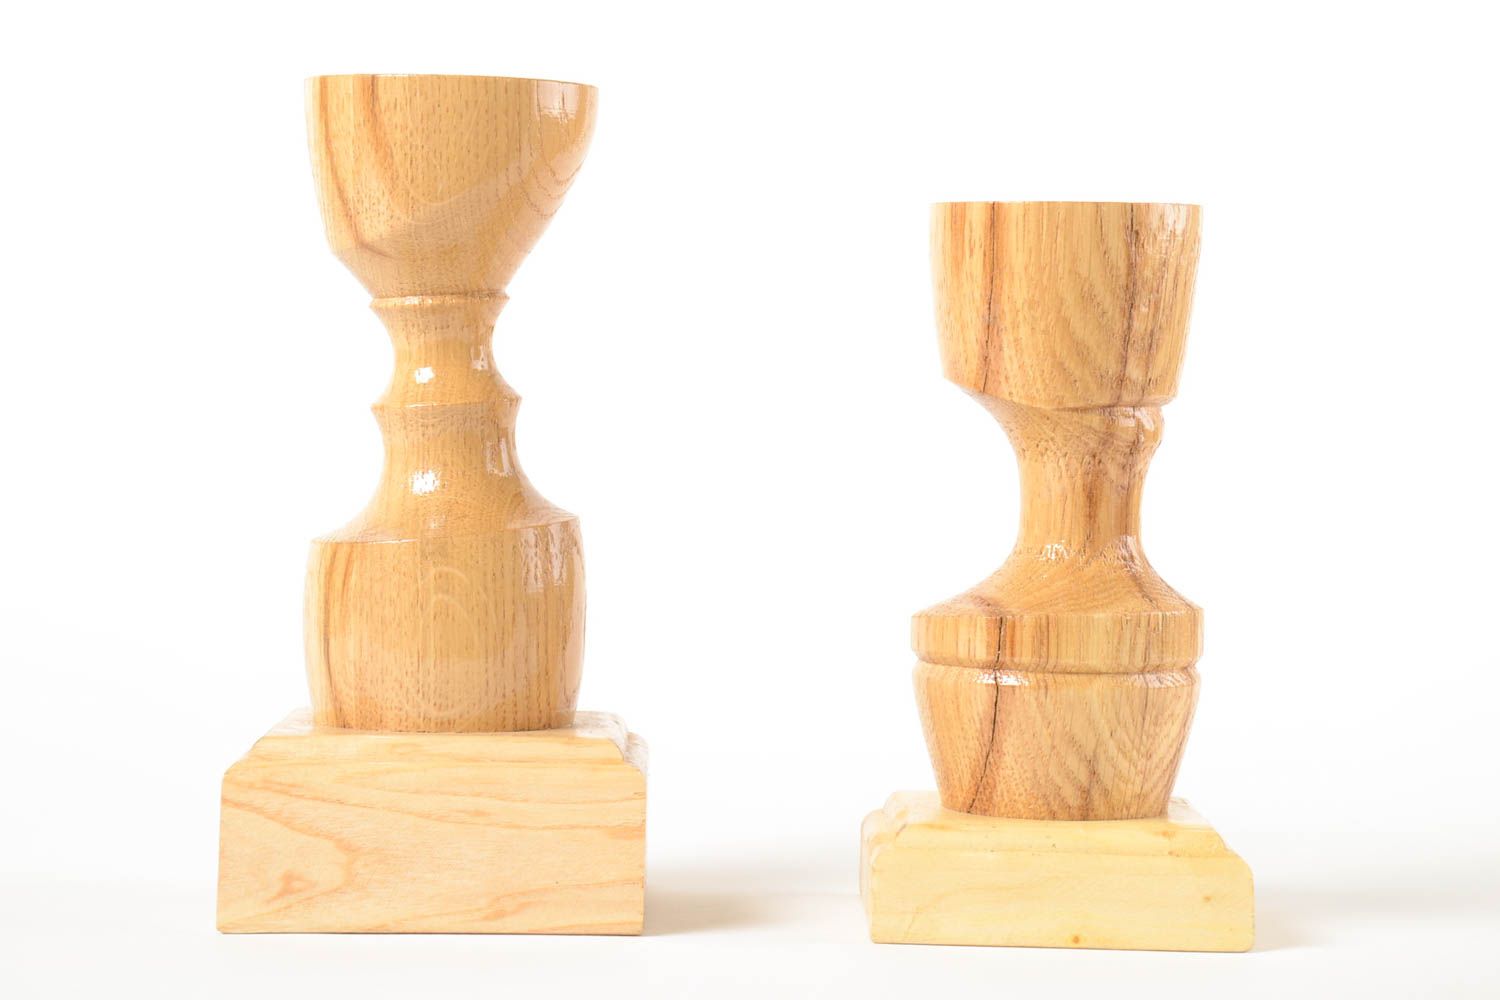 Unusual handmade wooden candlesticks 2 pieces candle holder design gift ideas photo 2